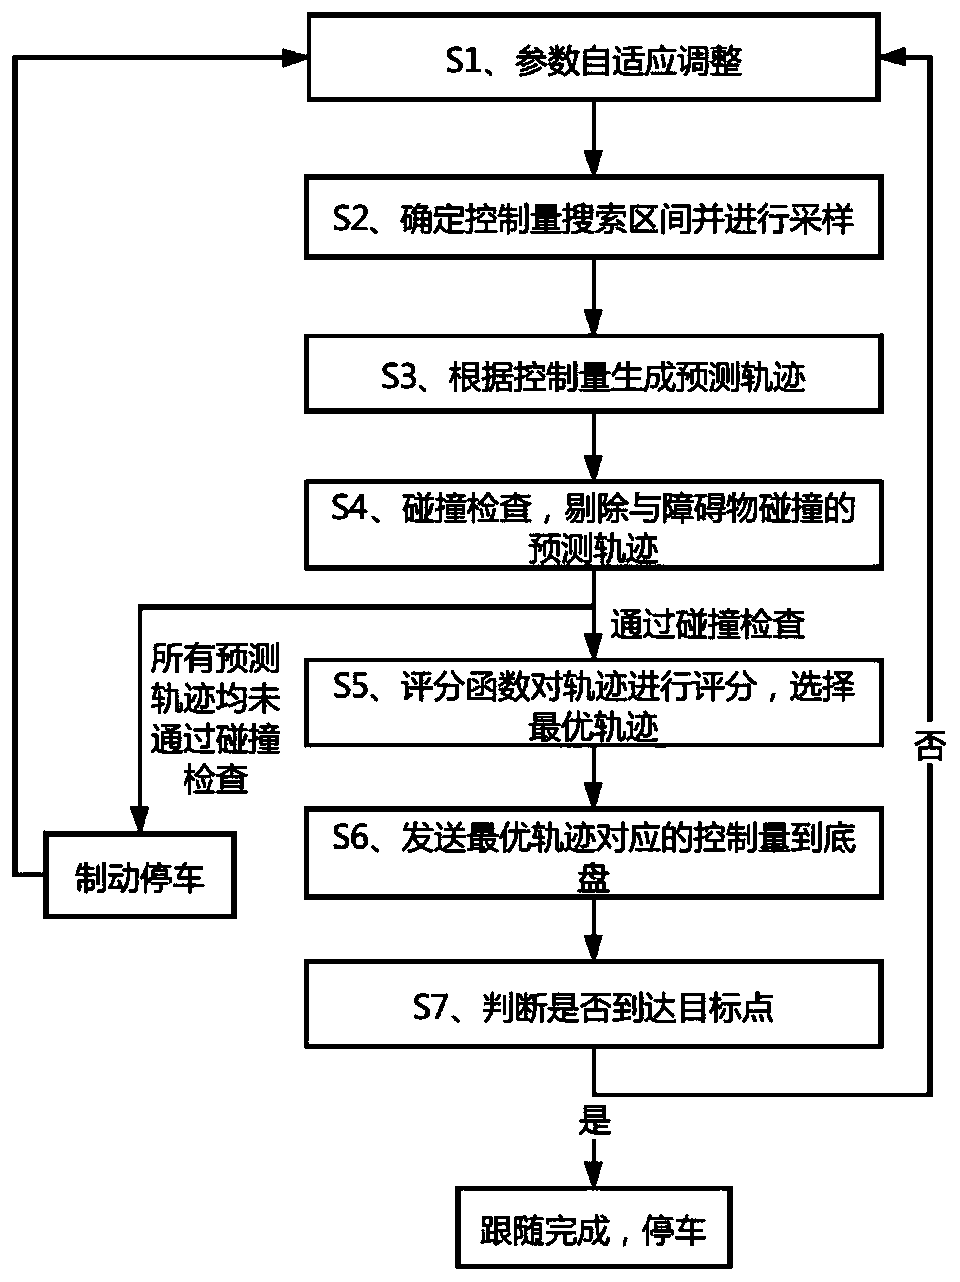 Unmanned vehicle path tracking and obstacle avoidance method